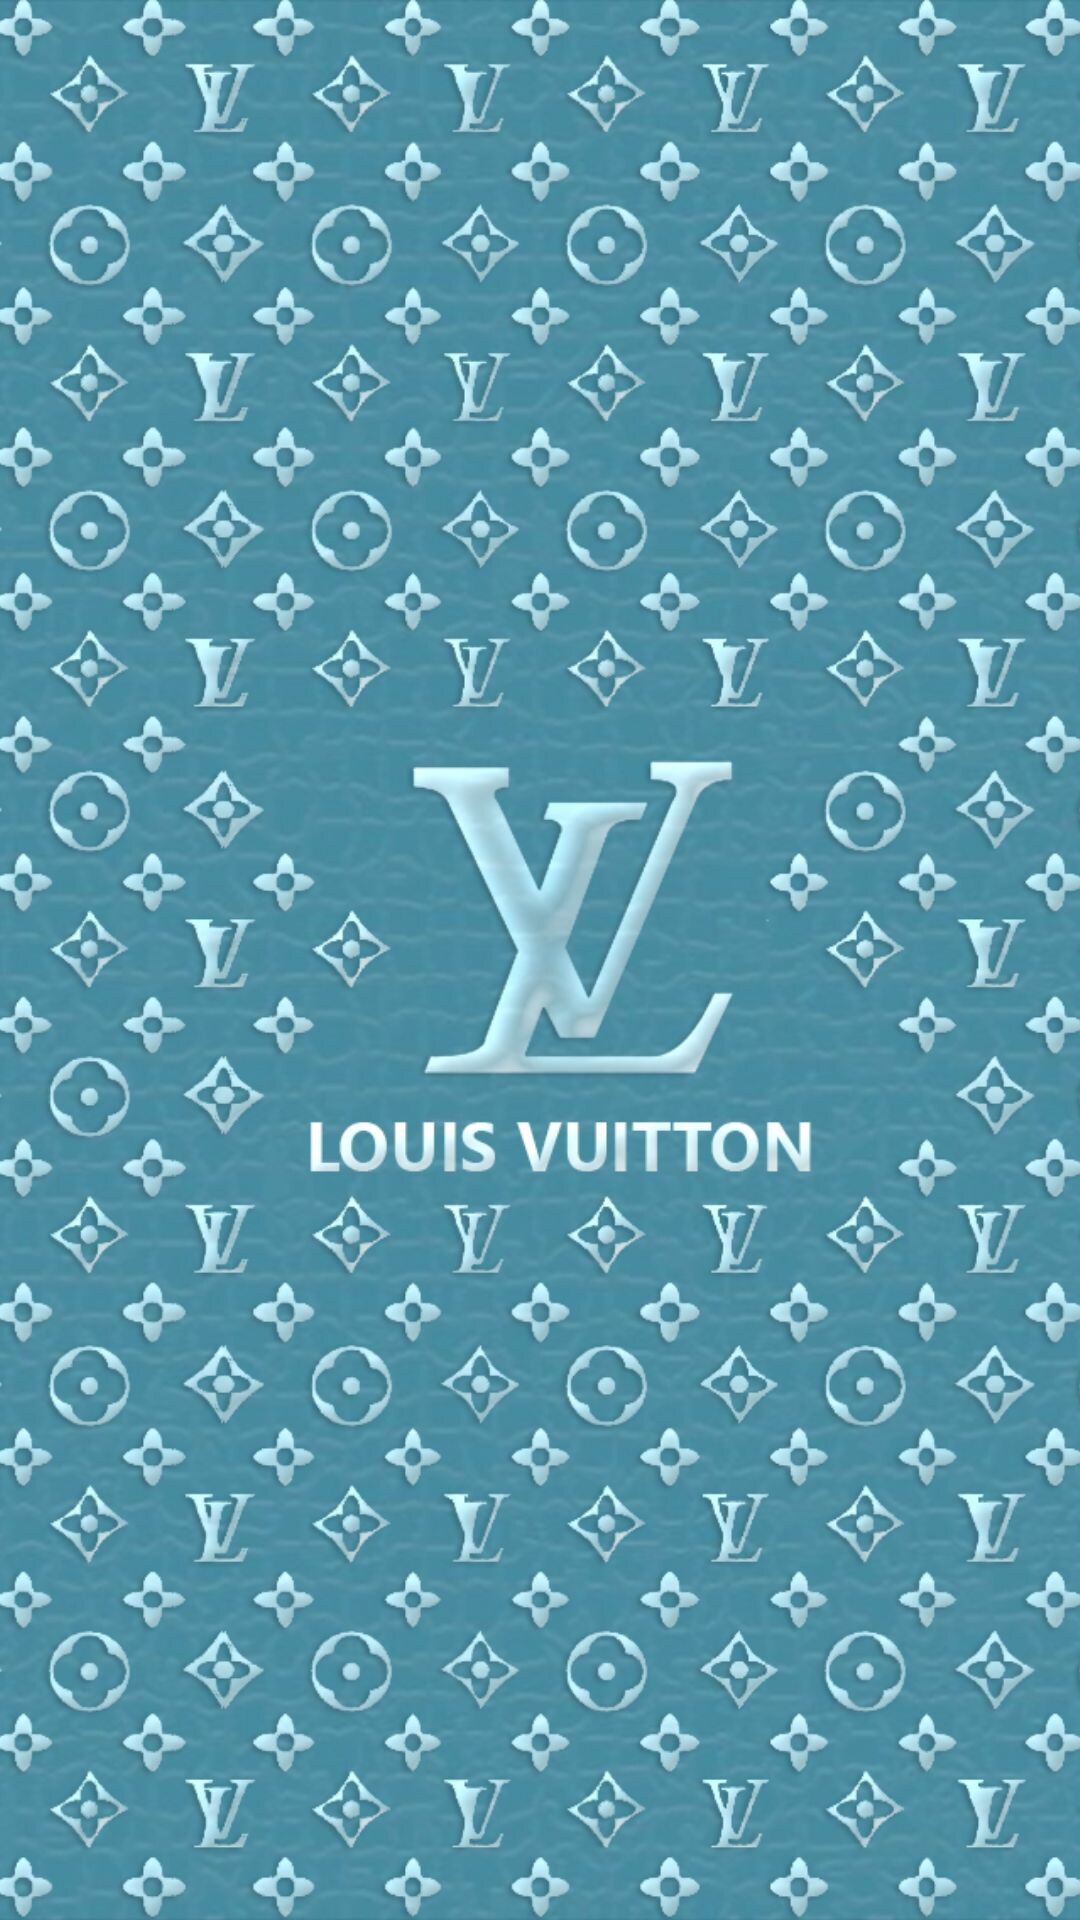 Louis Vuitton: One of the most counterfeited brands in the fashion world due to its image as a status symbol. 1080x1920 Full HD Background.